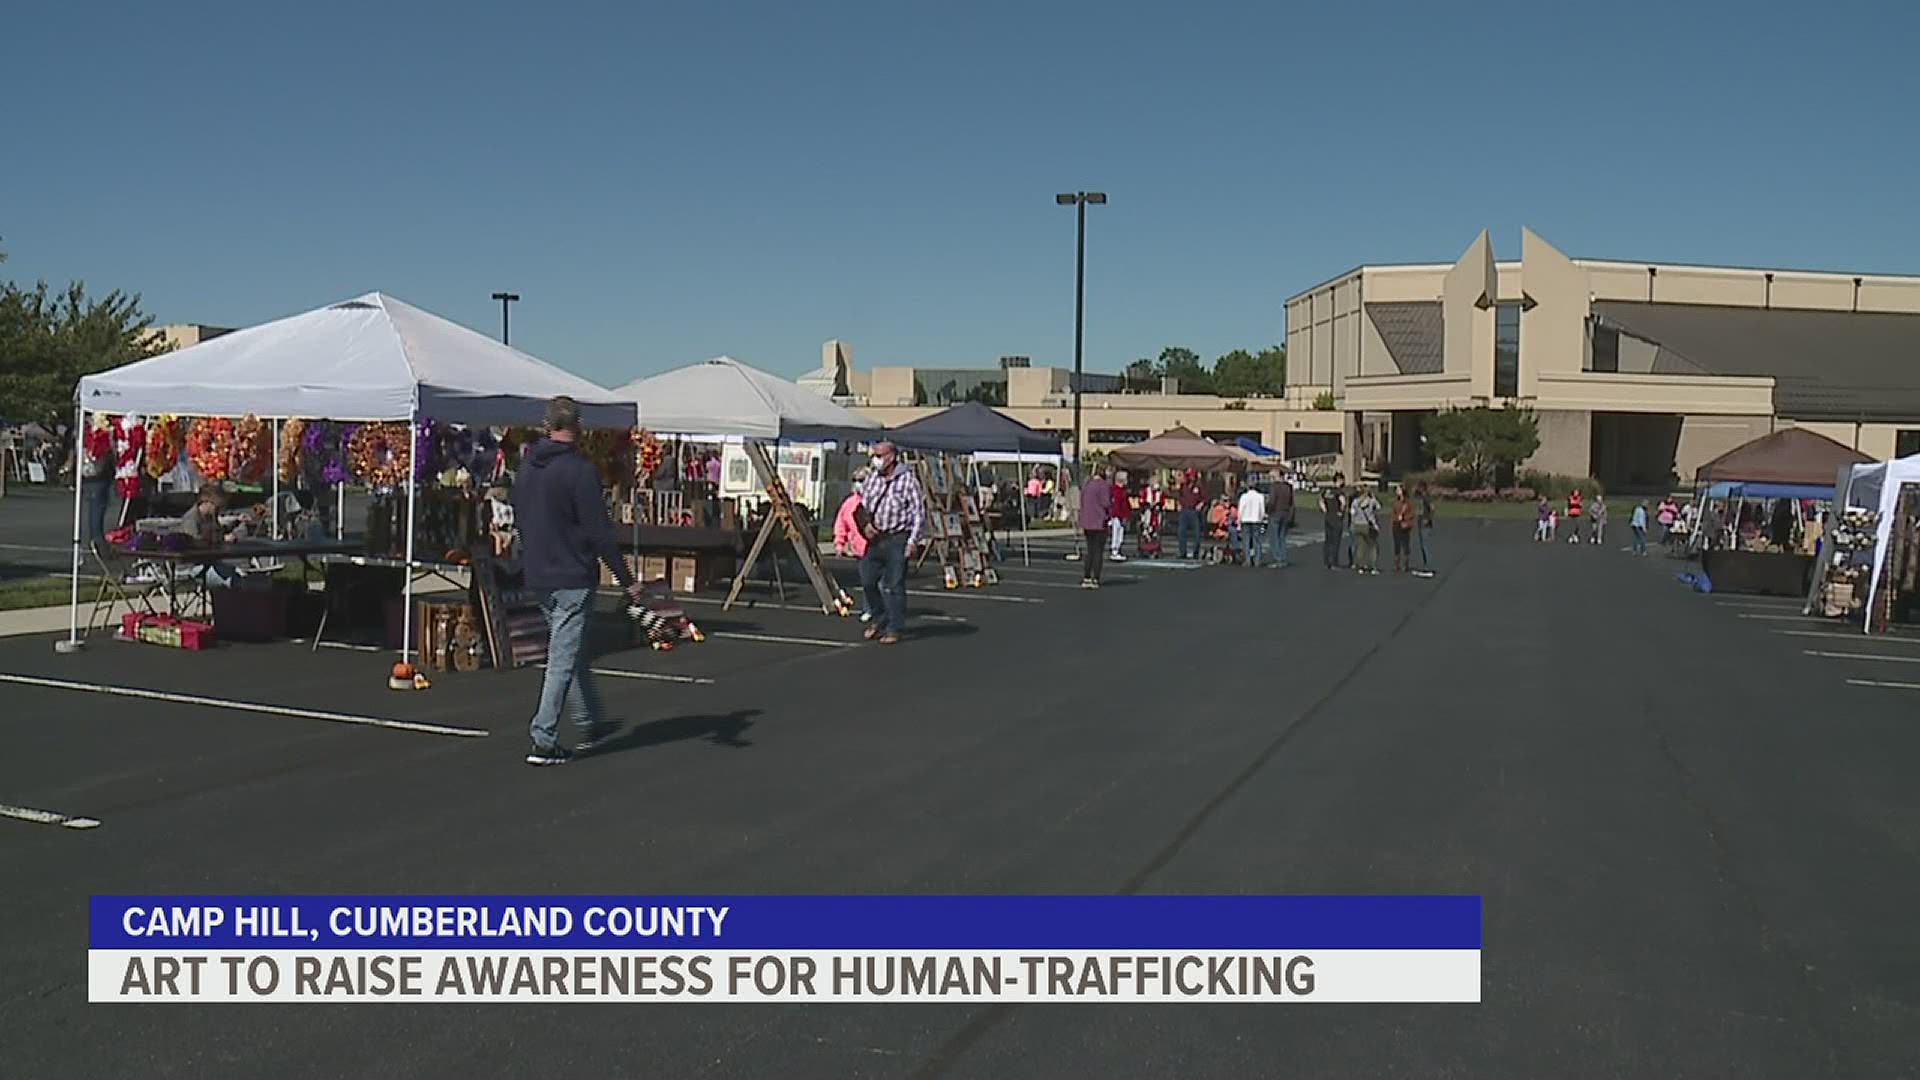 The festival is held to raise awareness and support for victims of human trafficking.